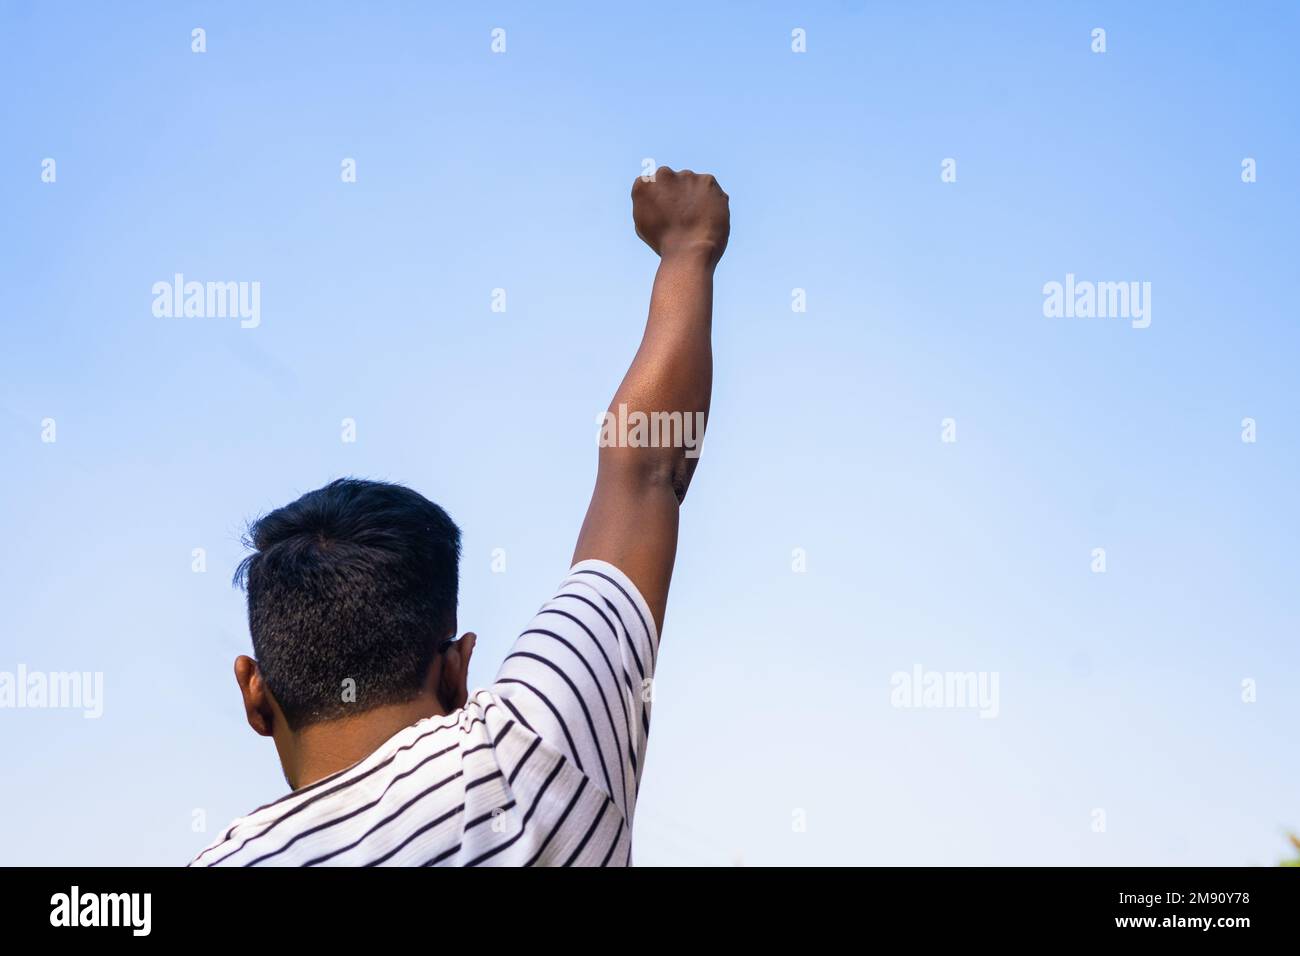 Back view shot of young man raising hand fist against sky - concept of black history month, justice and activism. Stock Photo